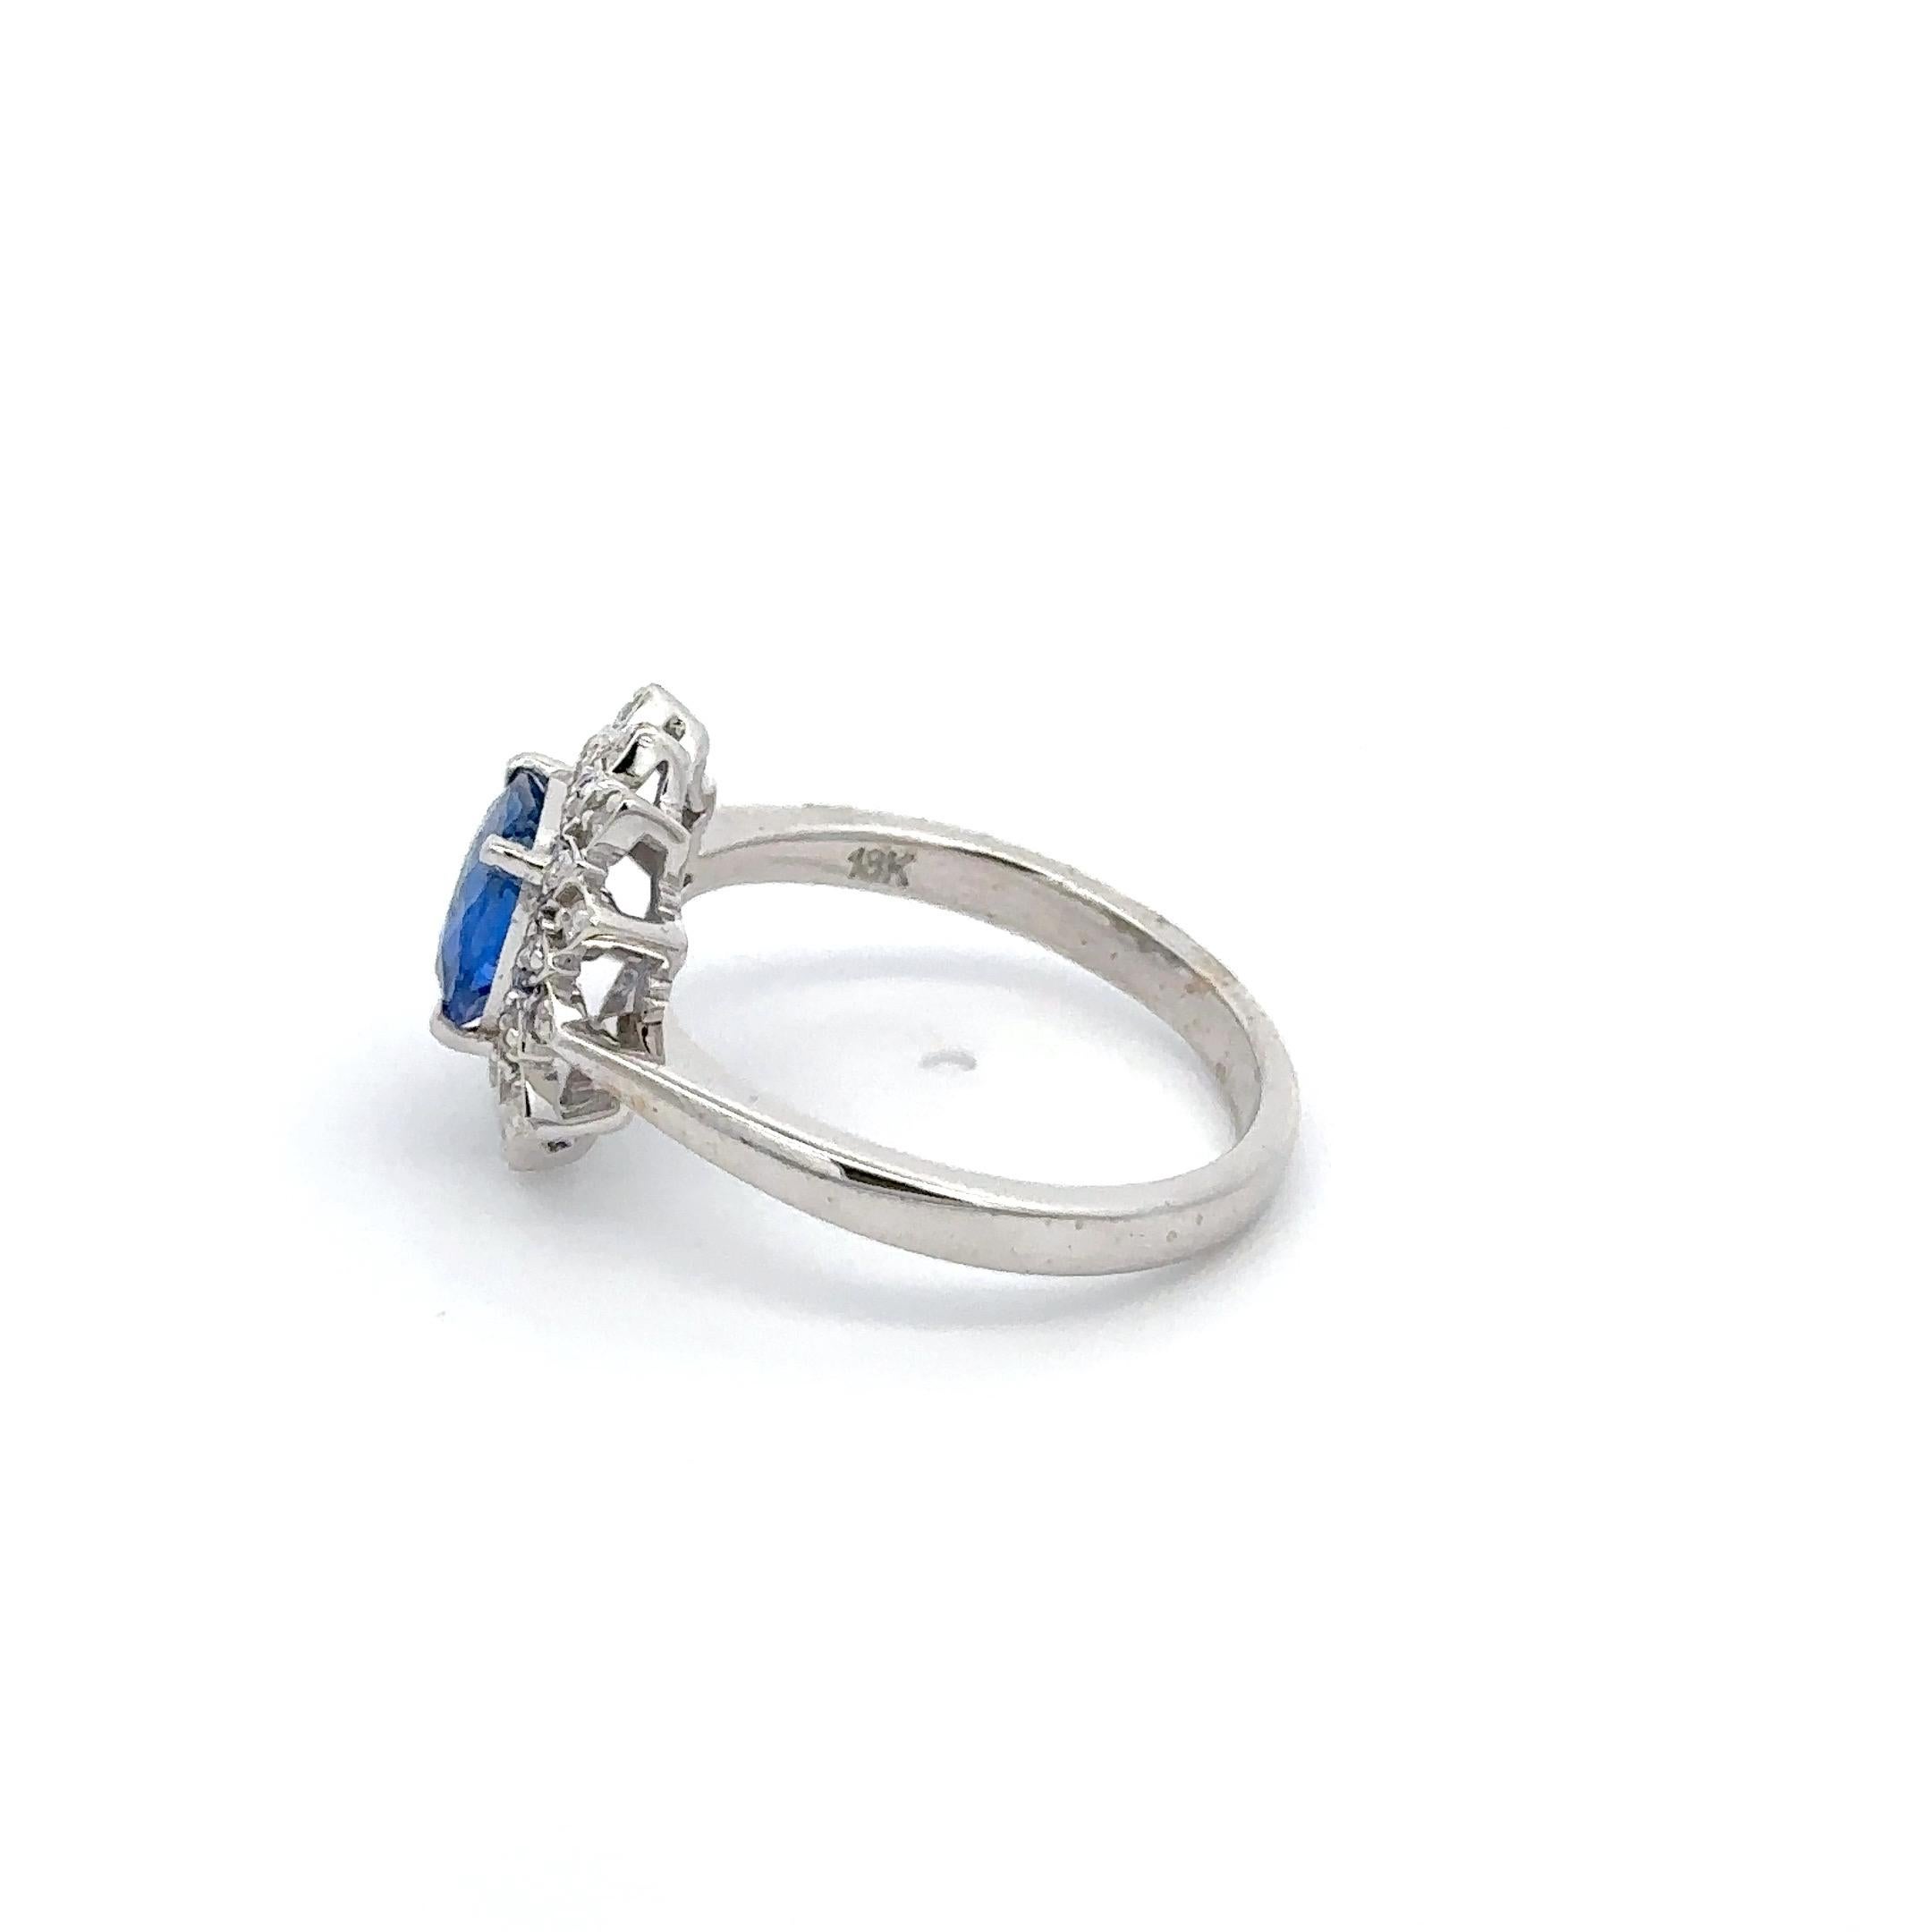 For Sale:  Genuine Blue Sapphire Halo Diamond Engagement Ring 18k Solid White Gold 3